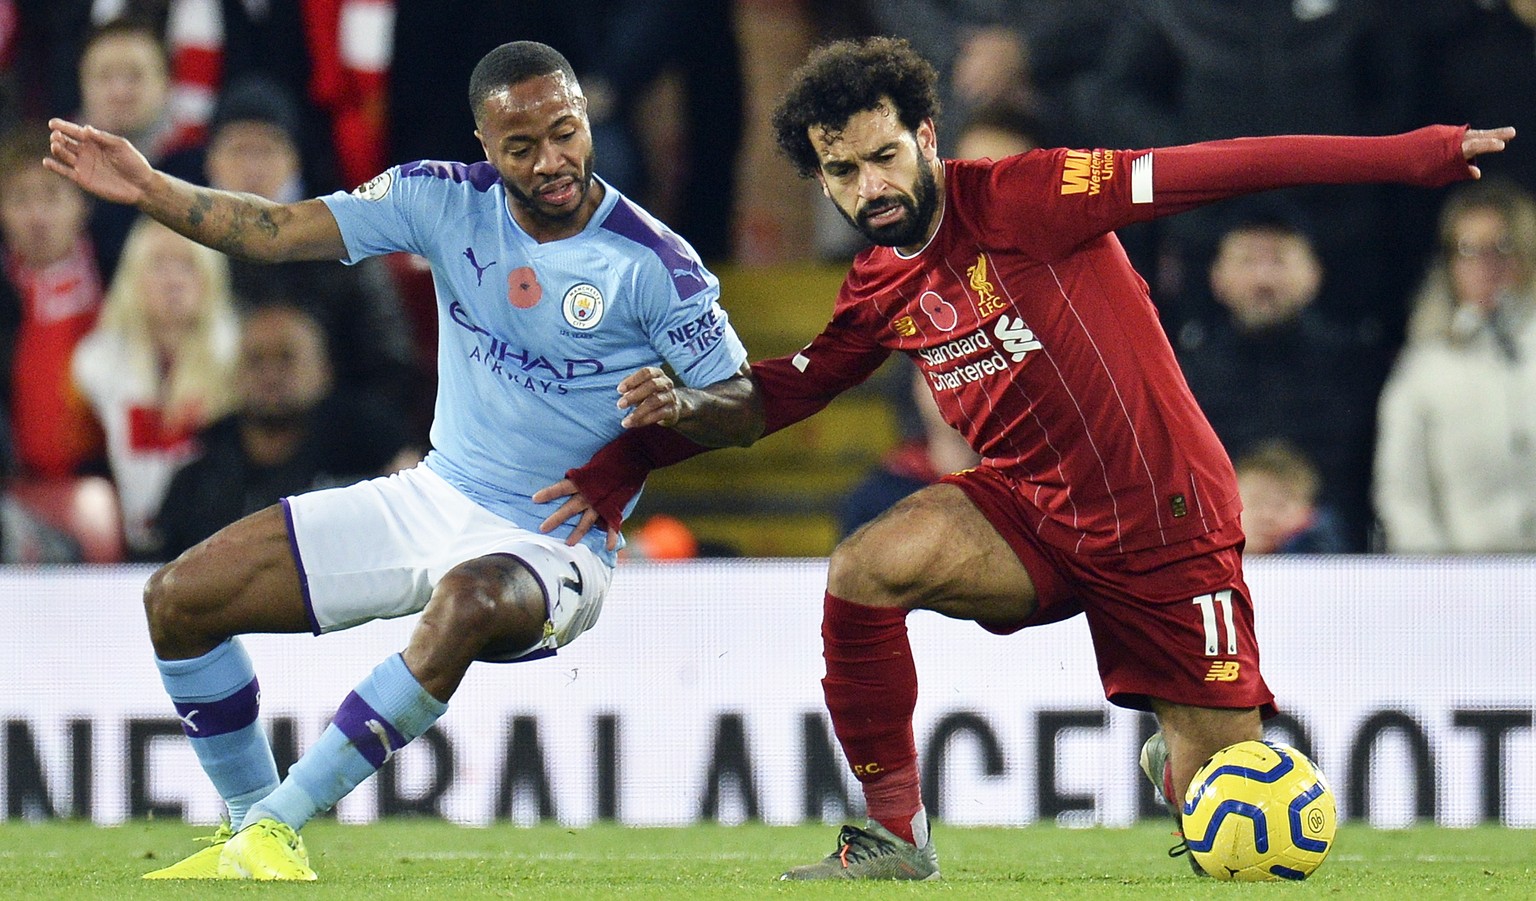 epa07986506 Mohamed Salah (R) of Liverpool in action against Raheem Sterling (L) of Manchester City during the English Premier League soccer match between Liverpool FC and Manchester City in Liverpool ...